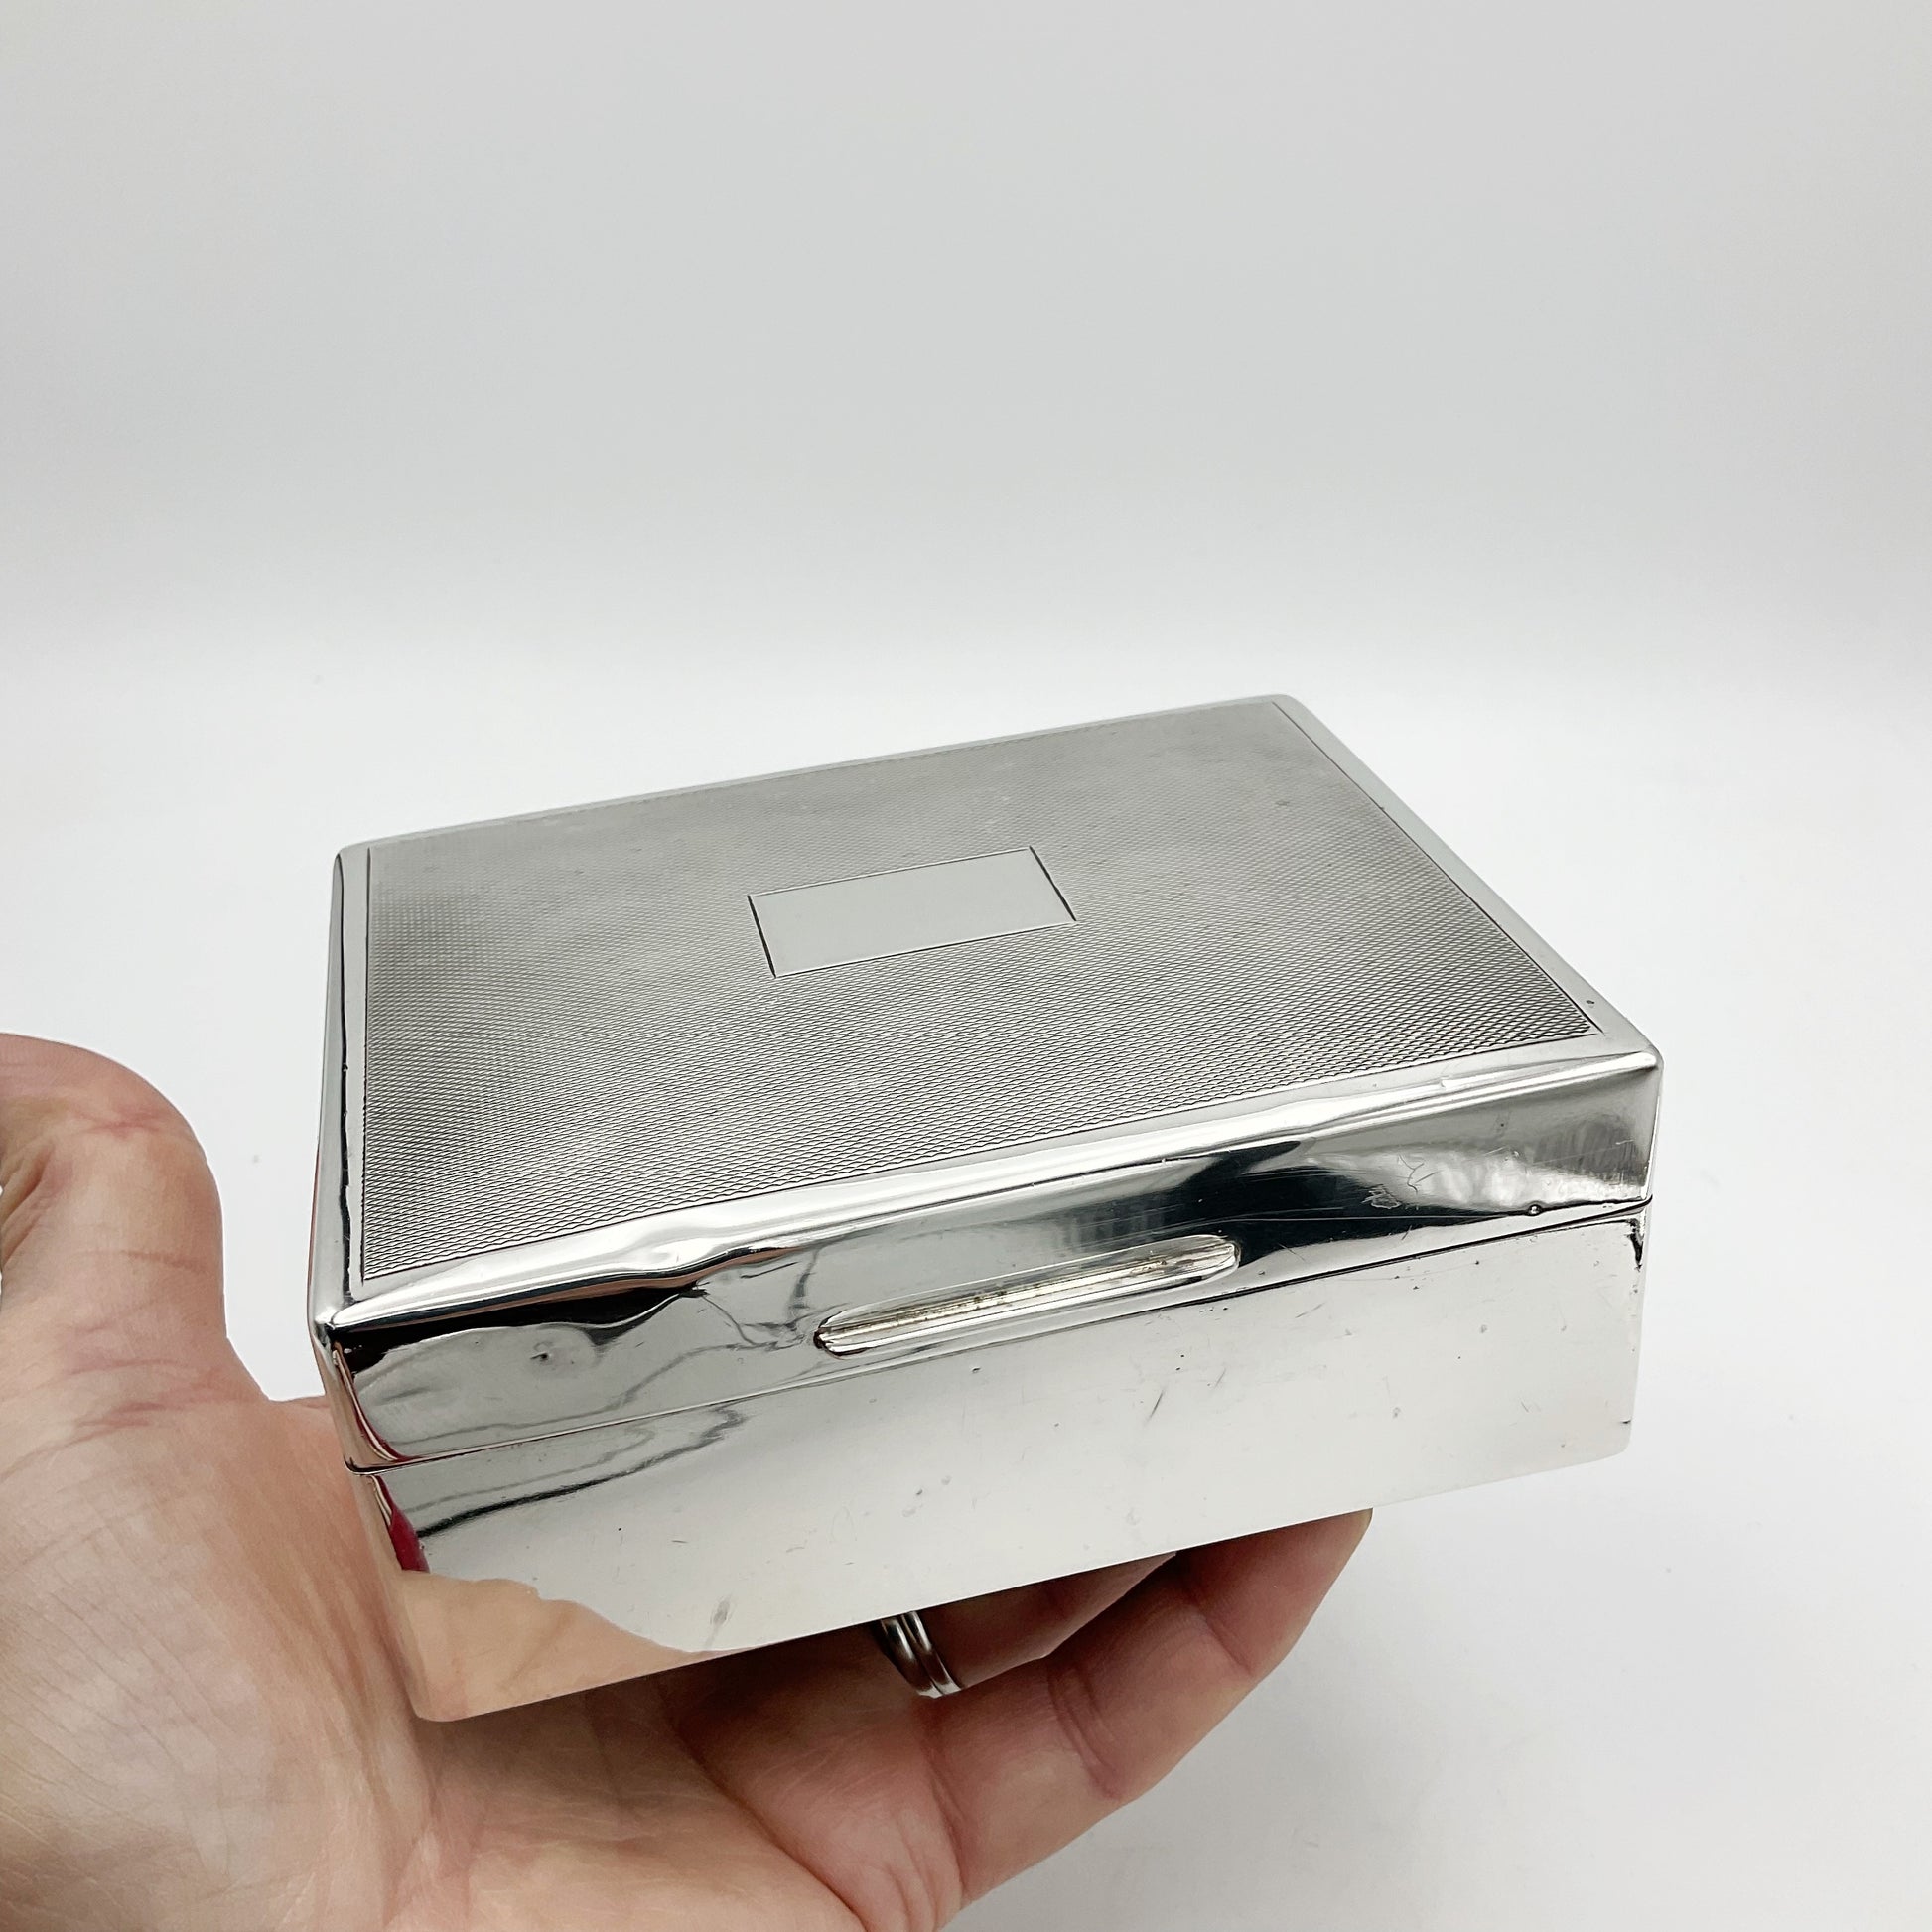 Shiny vintage silver cigarette box held in a hand